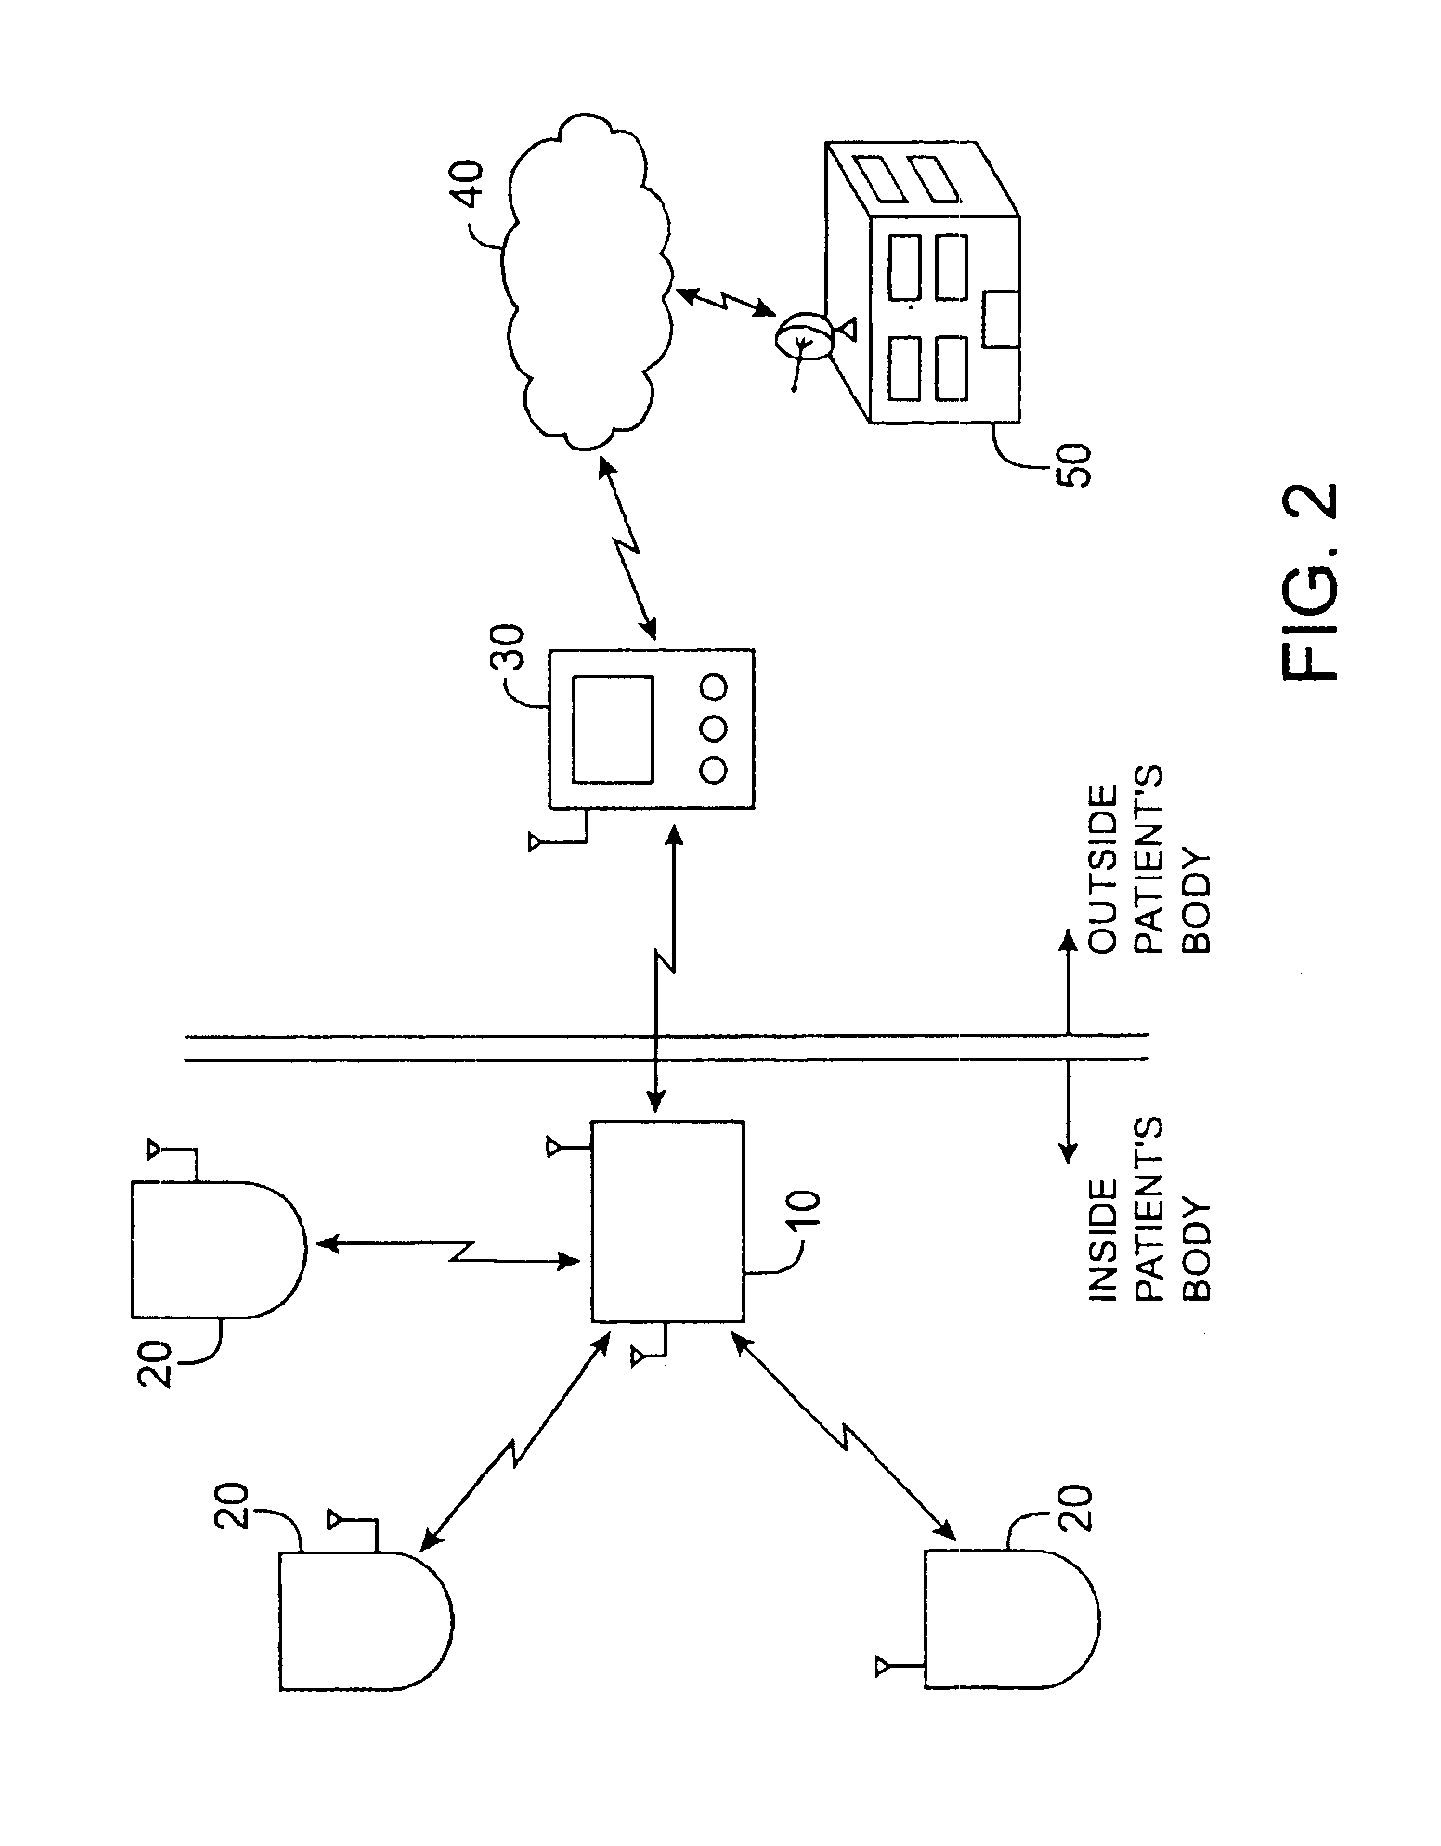 Method and apparatus for monitoring and communicating with an implanted medical device